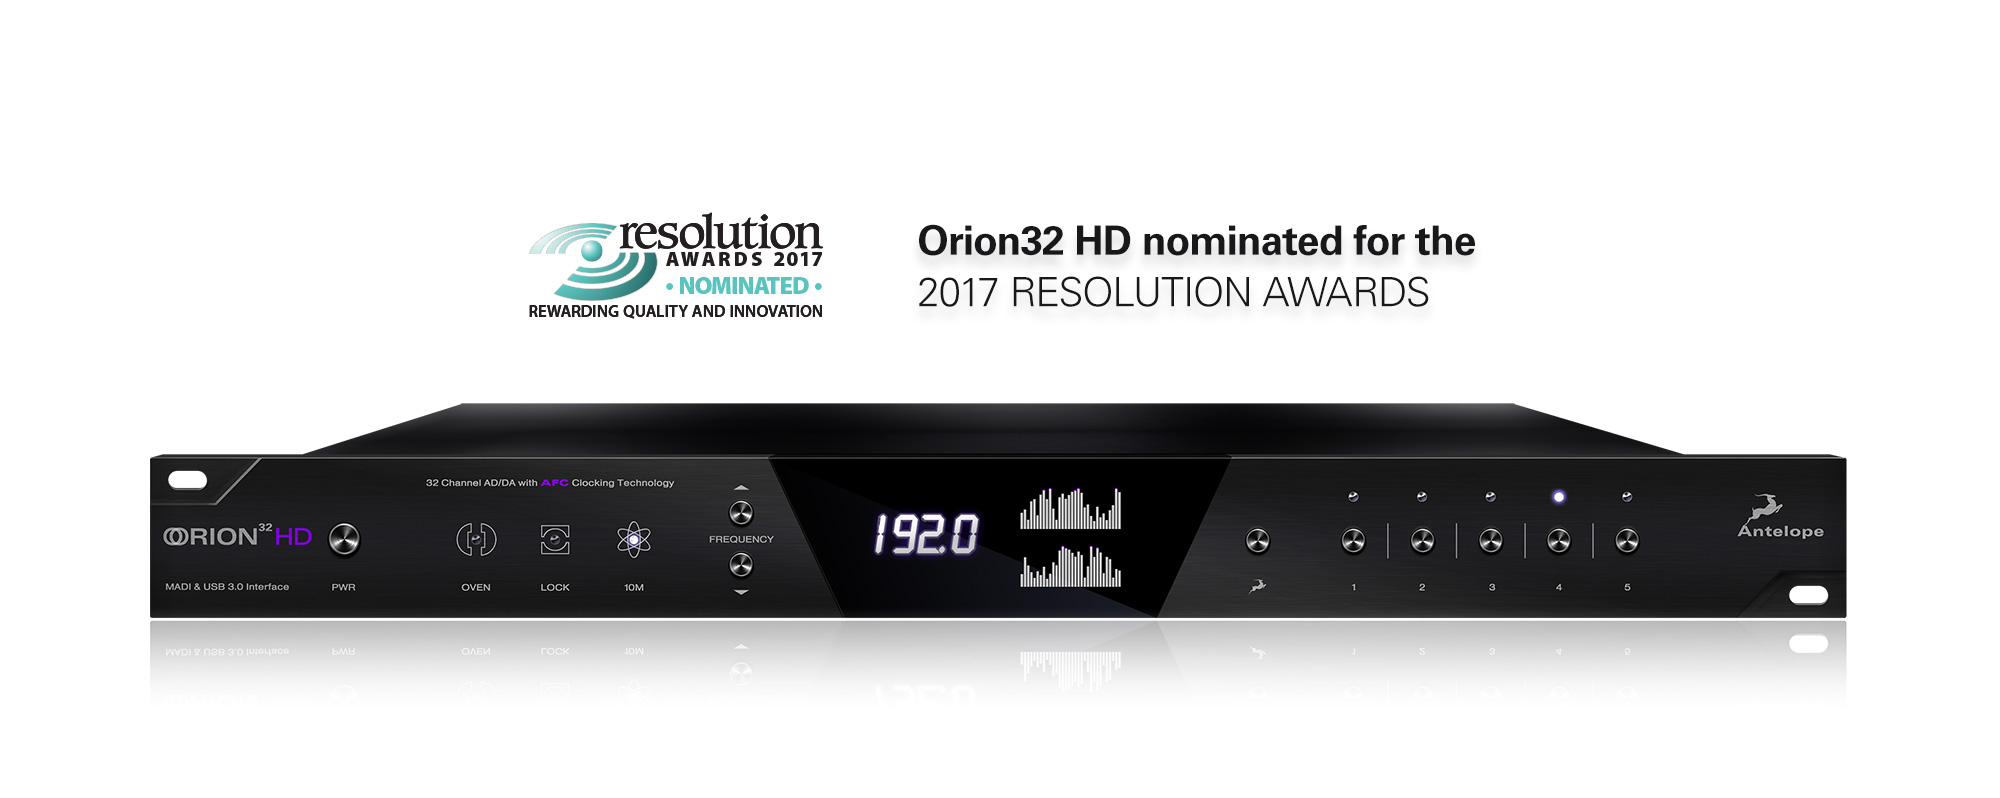 Orion32 HD nominated for the 2017 Resolution Magazine Awards